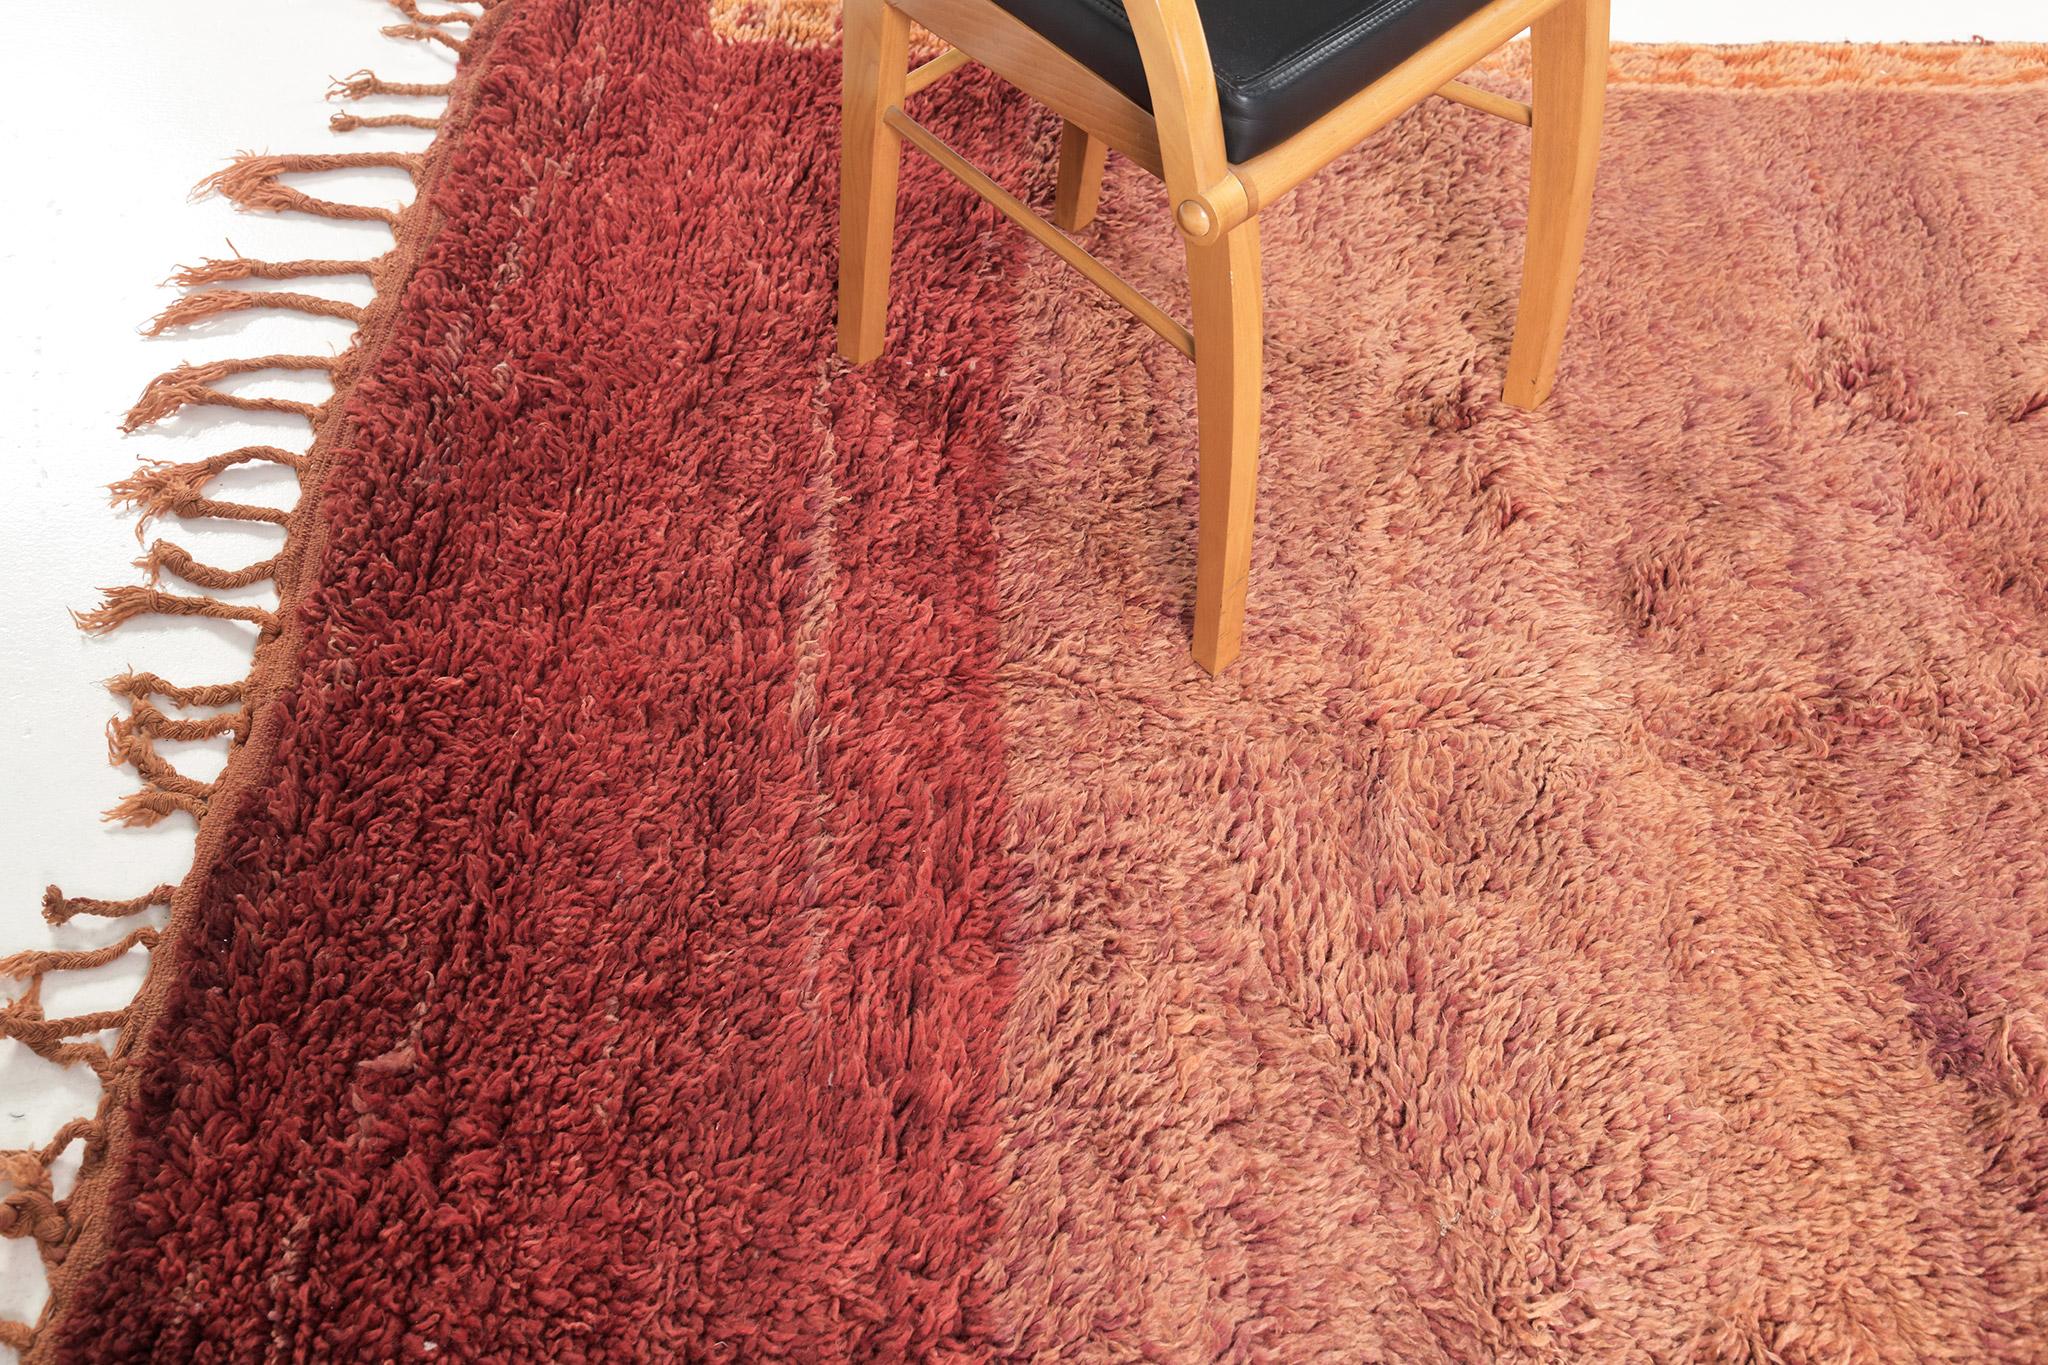 An interplay of stunning gradient colours in this Vintage Moroccan Beni M’Guild Tribe rug that has embossed ornate elements featuring the vibrant gradient shades of fire brick to rust. It vividly displays a plush texture that forms the eclectic